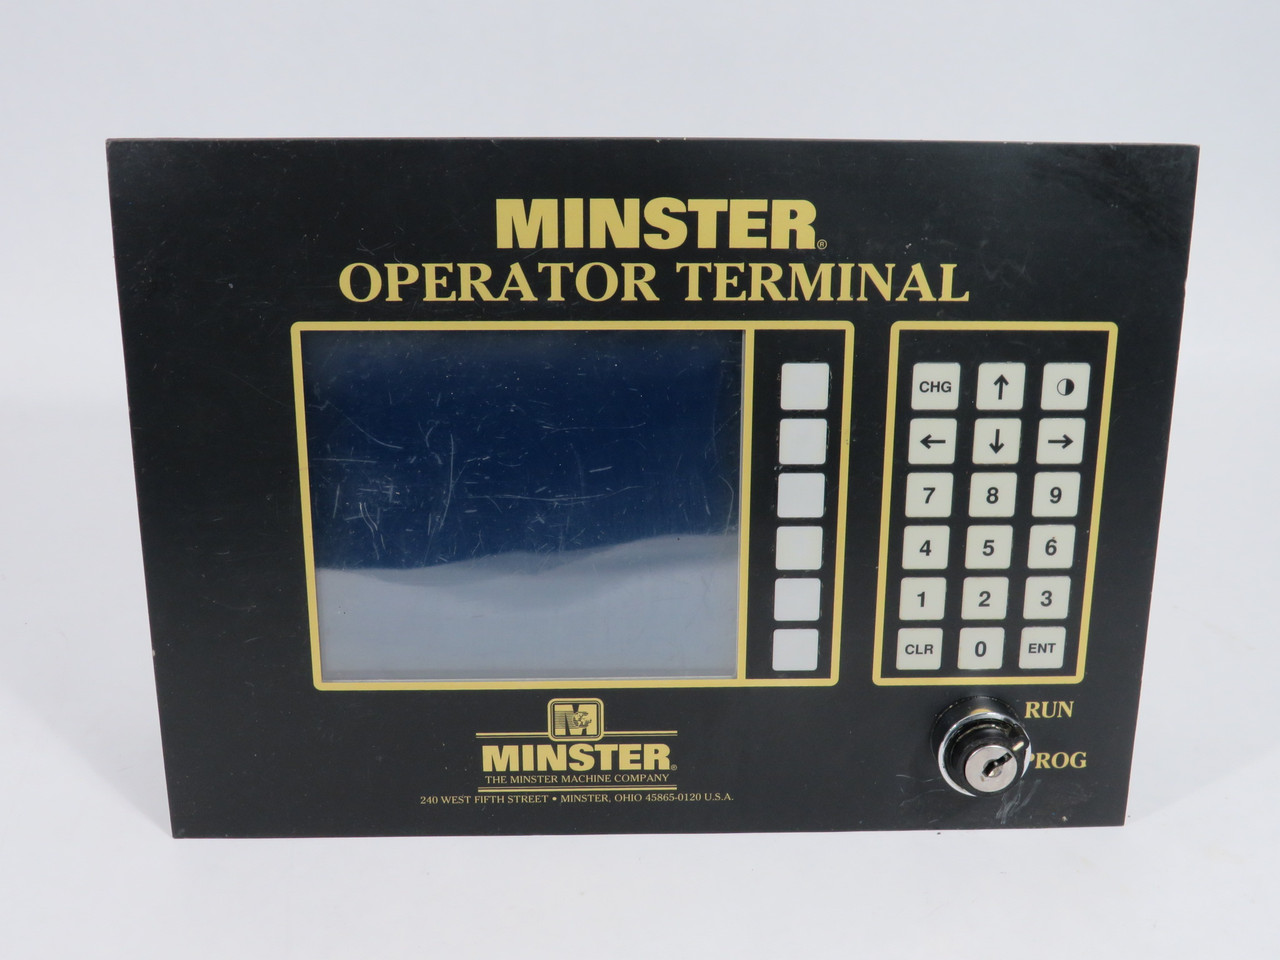 Minster Link Electric OT-800 Operator Terminal SCRATCHES/DAMAGED GASKET USED